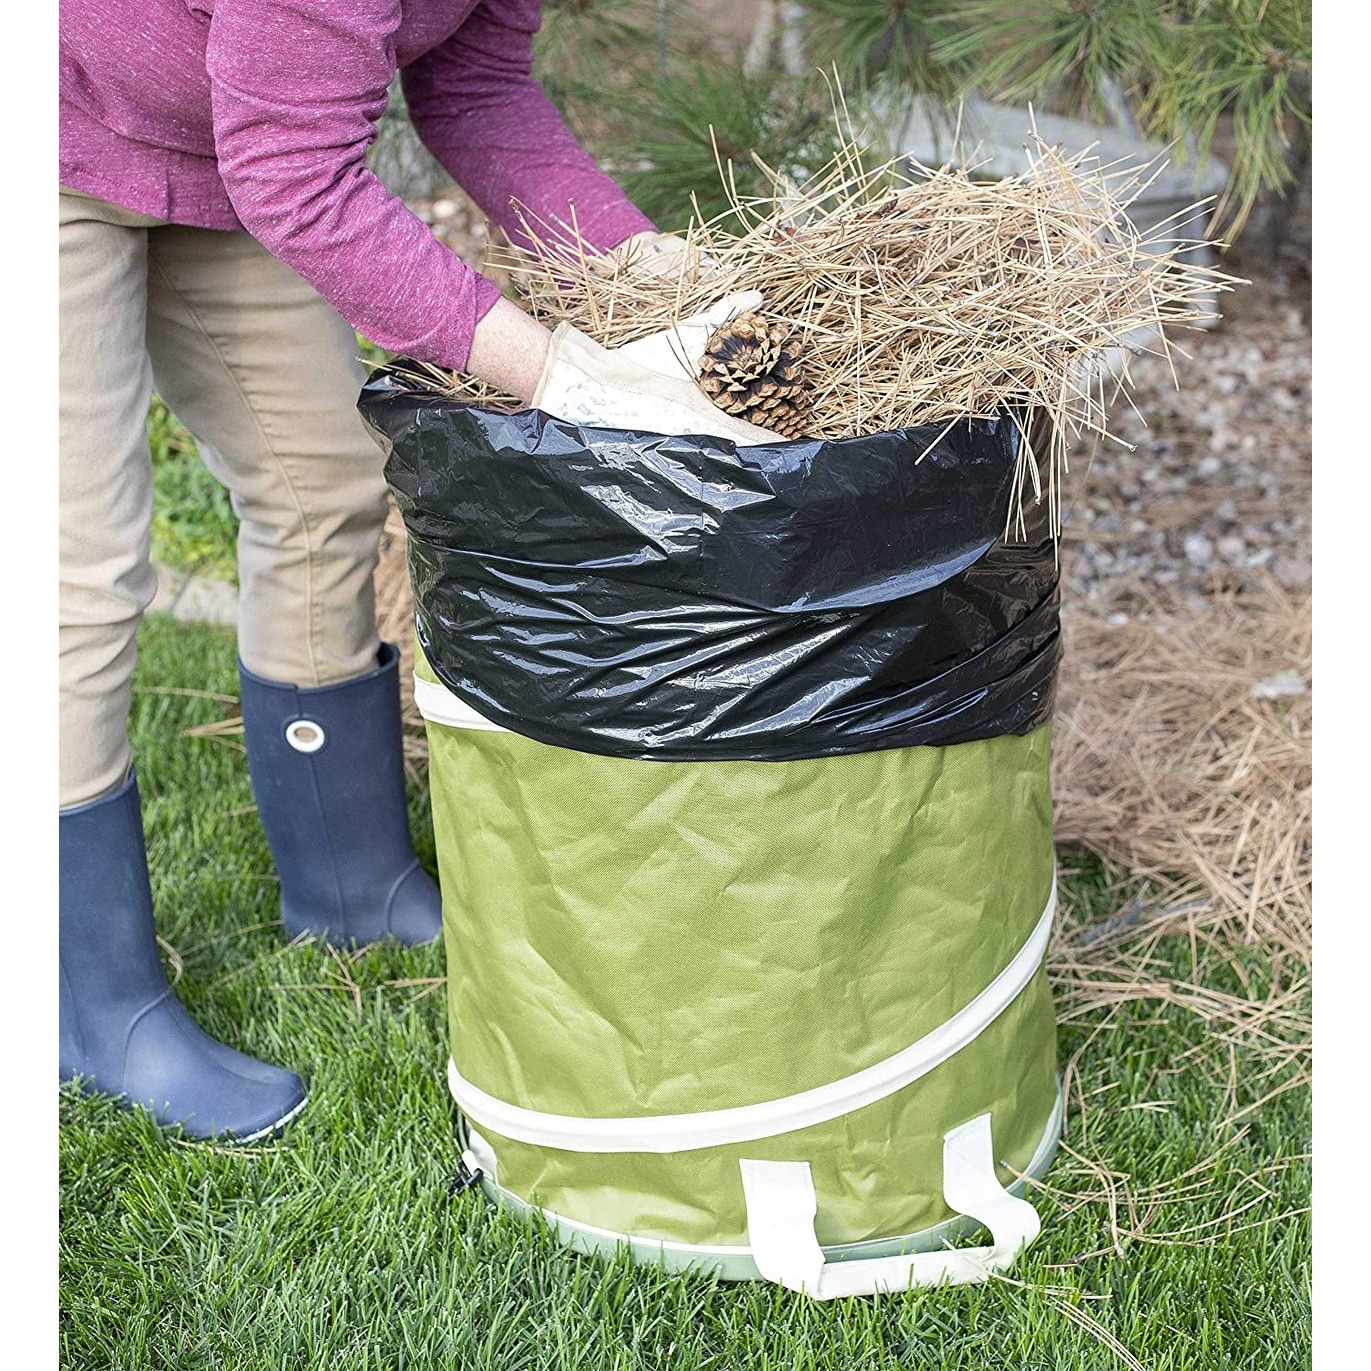 https://ak1.ostkcdn.com/images/products/is/images/direct/ad297e5728d0417c17fd2a04151264758b186f48/BirdRock-Home-30-Gallon-Collapsible-Lawn-and-Leaf-Waste-Bag---Reusable-Camping-Trash-Can.jpg